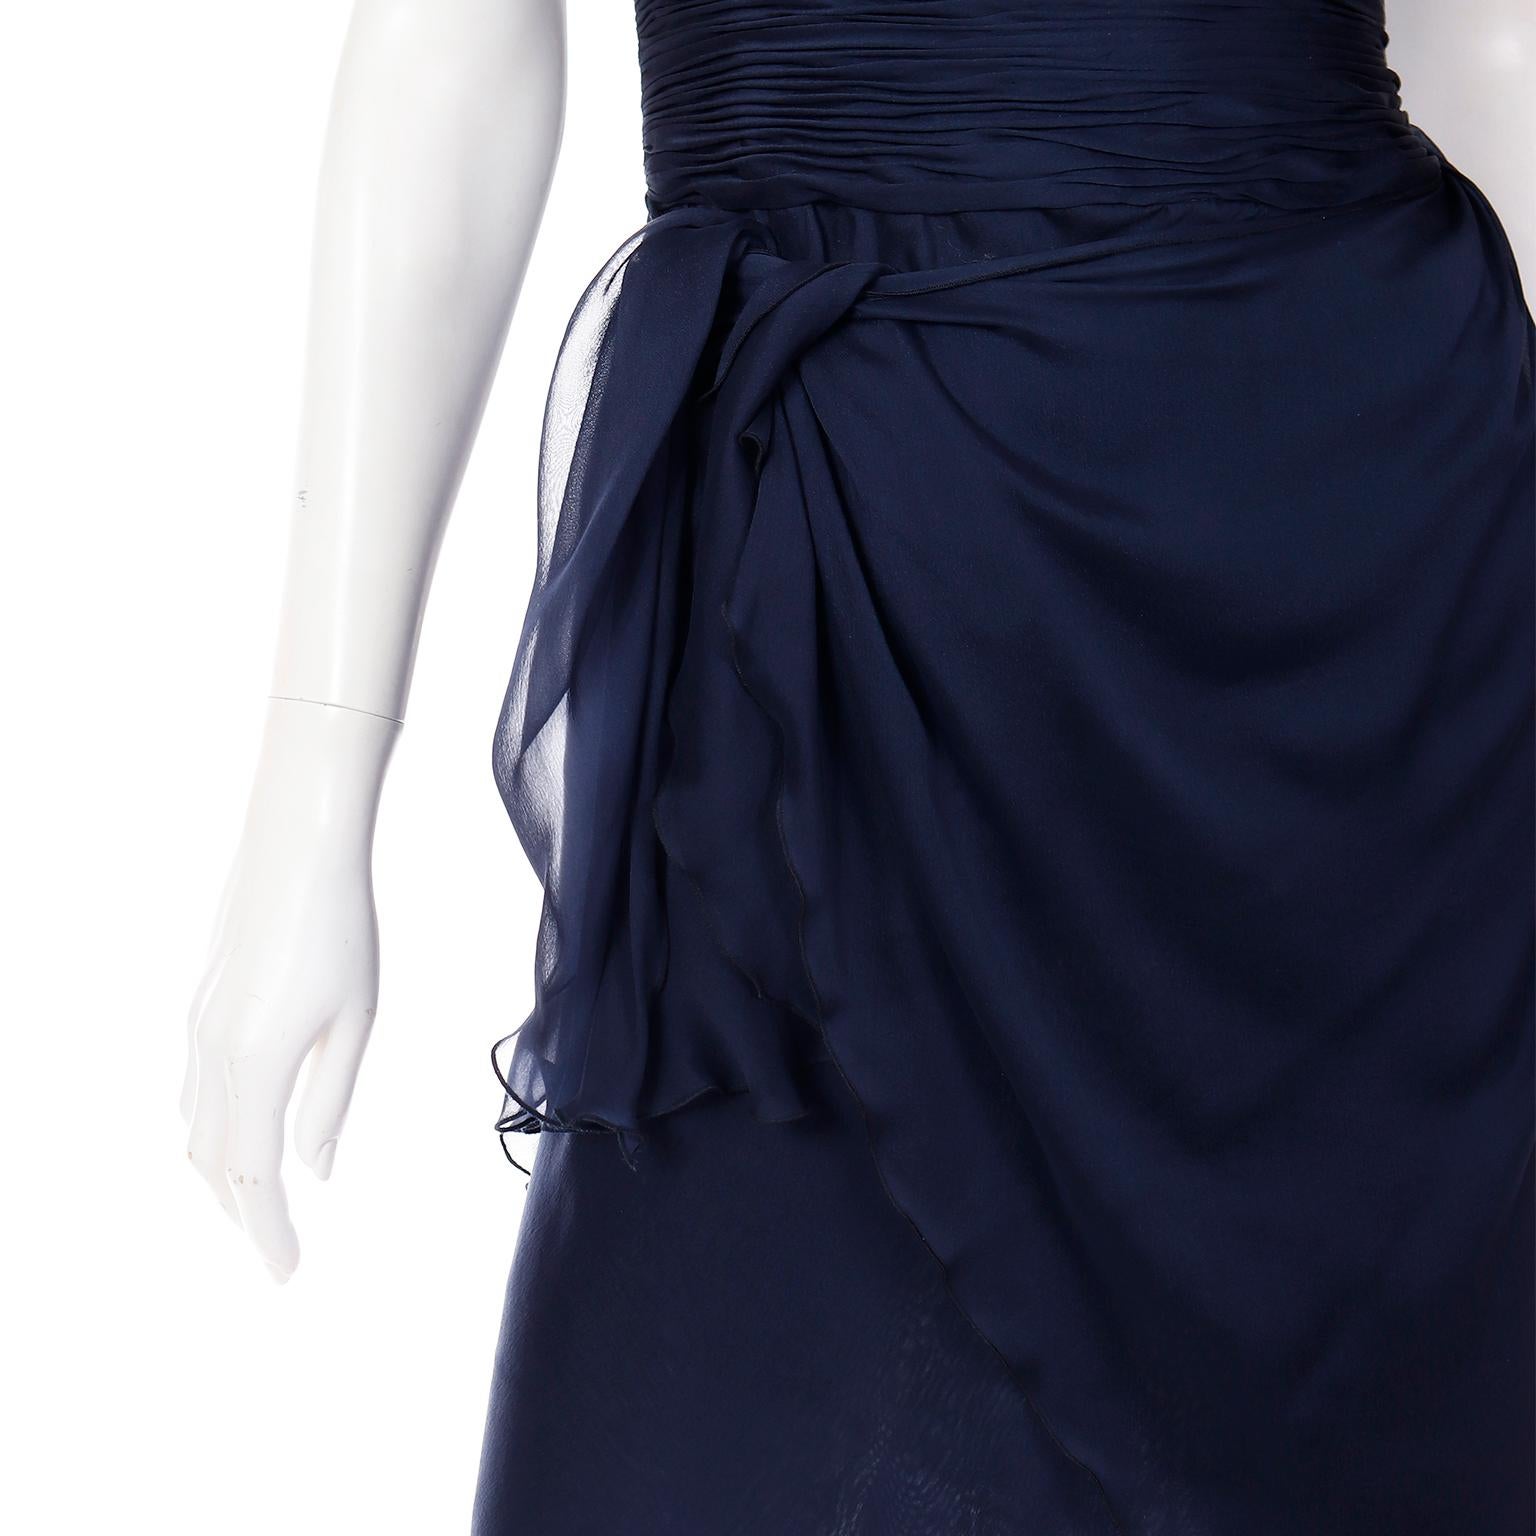 Valentino Blue Silk Chiffon Evening Dress With Fly Away Panel For Sale 7